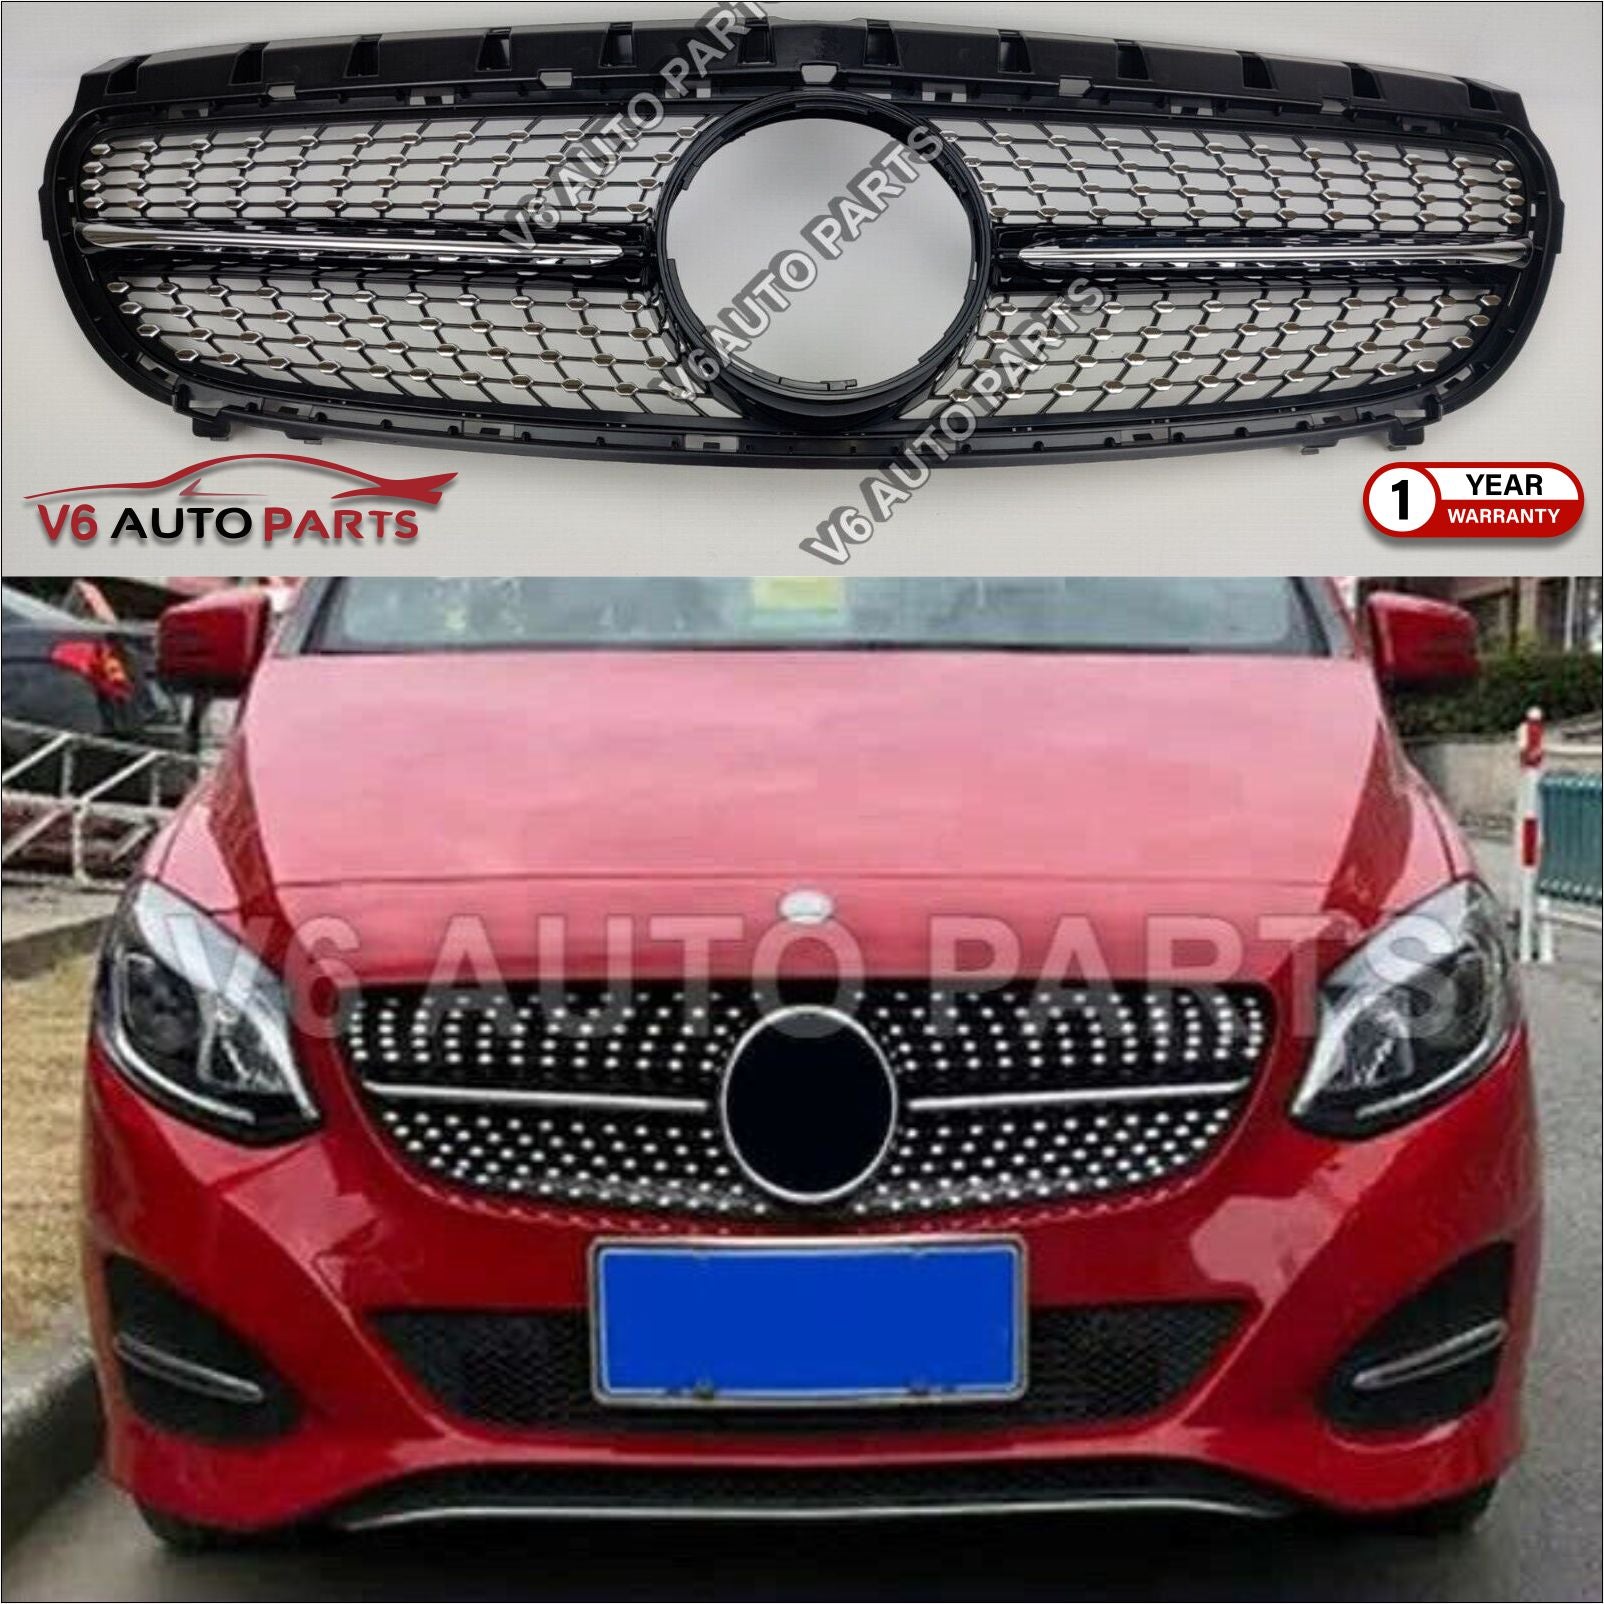 For Mercedes B-Class A246 B200 AMG Front Radiator Diamond Sports Grille 2015-18